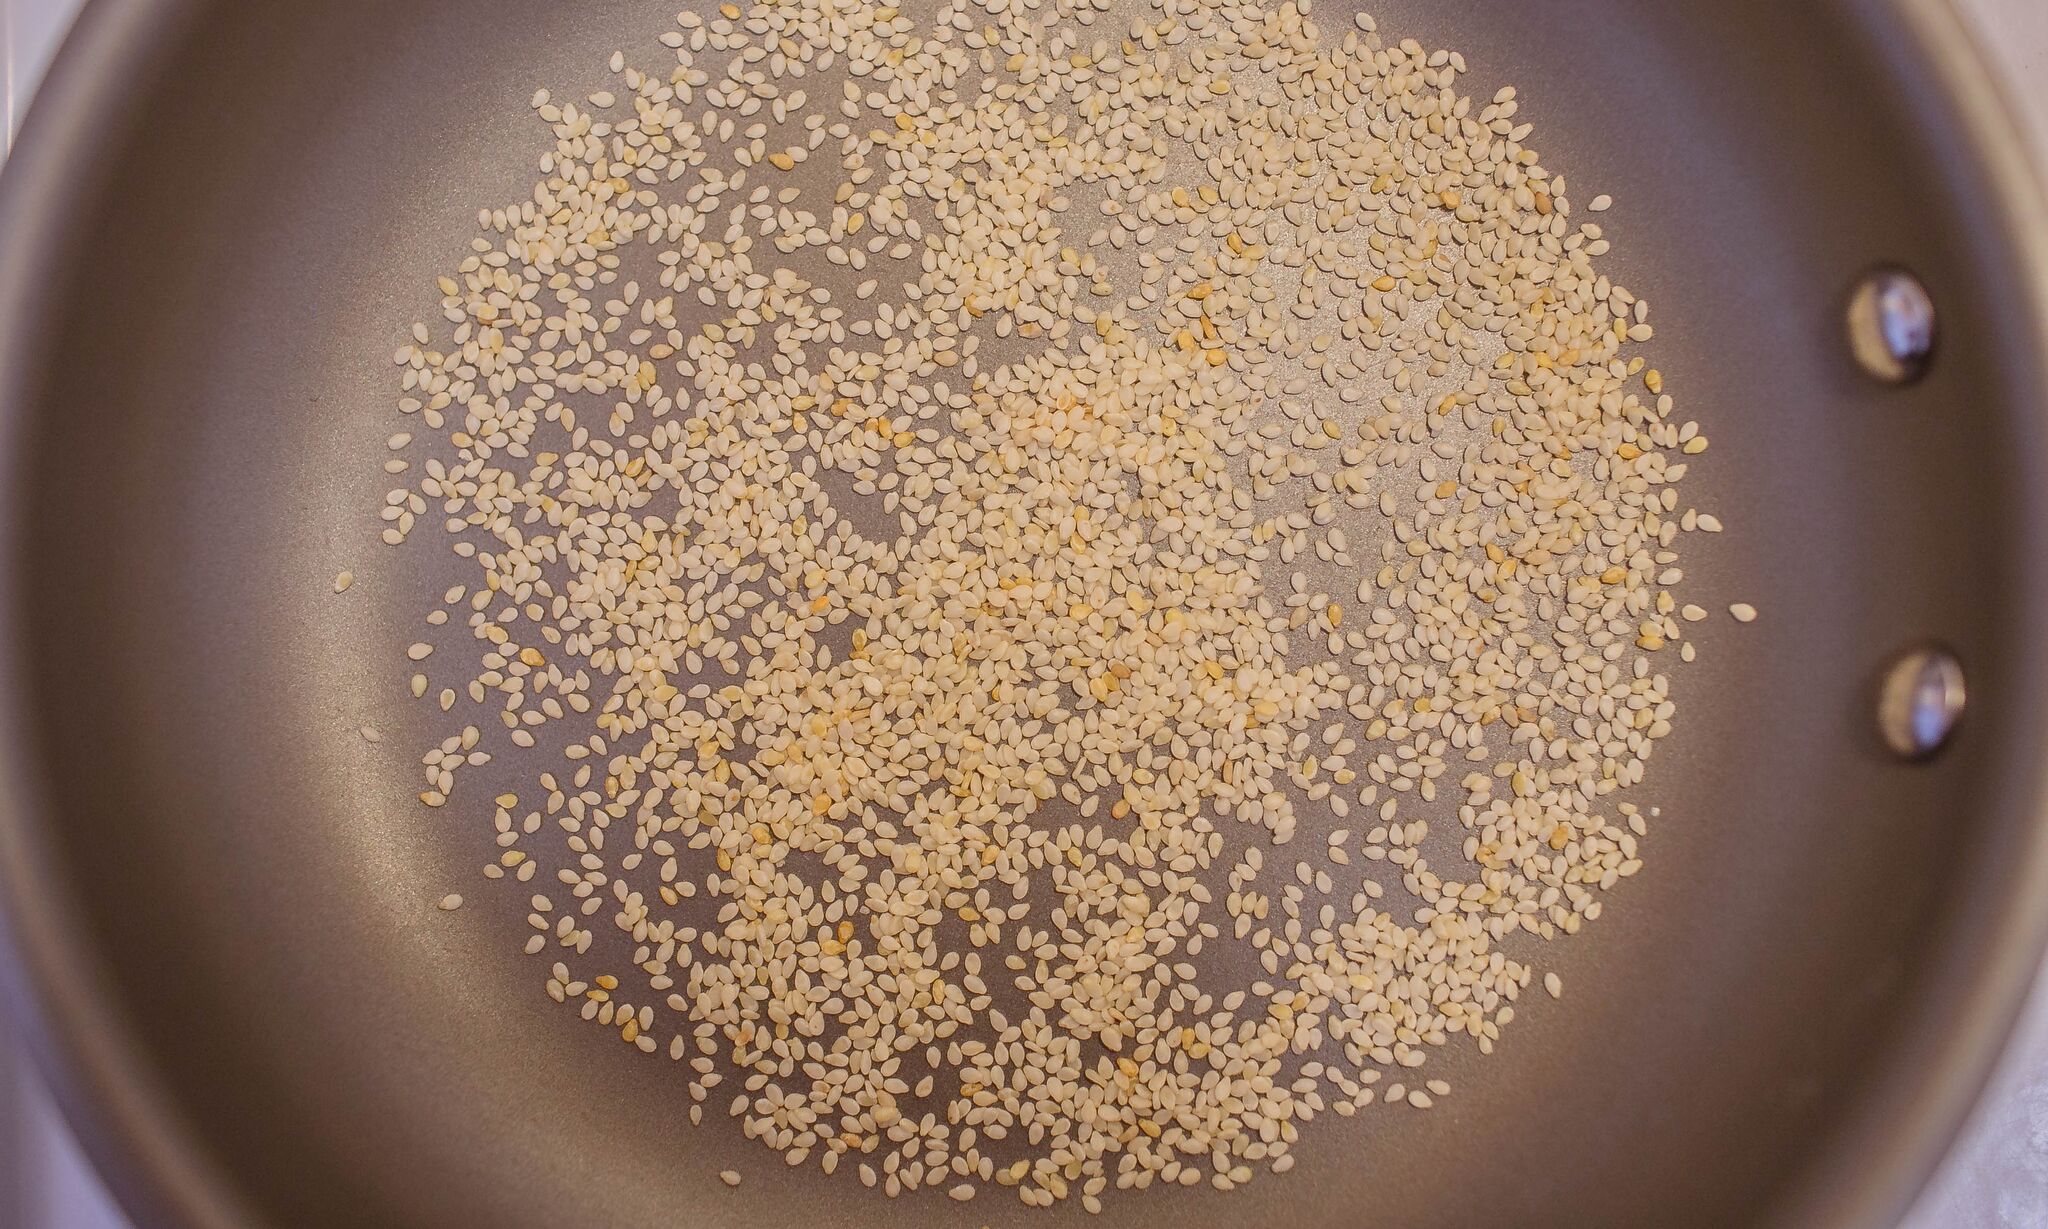 Toast sesame seeds in small frying pan until lightly golden in color.